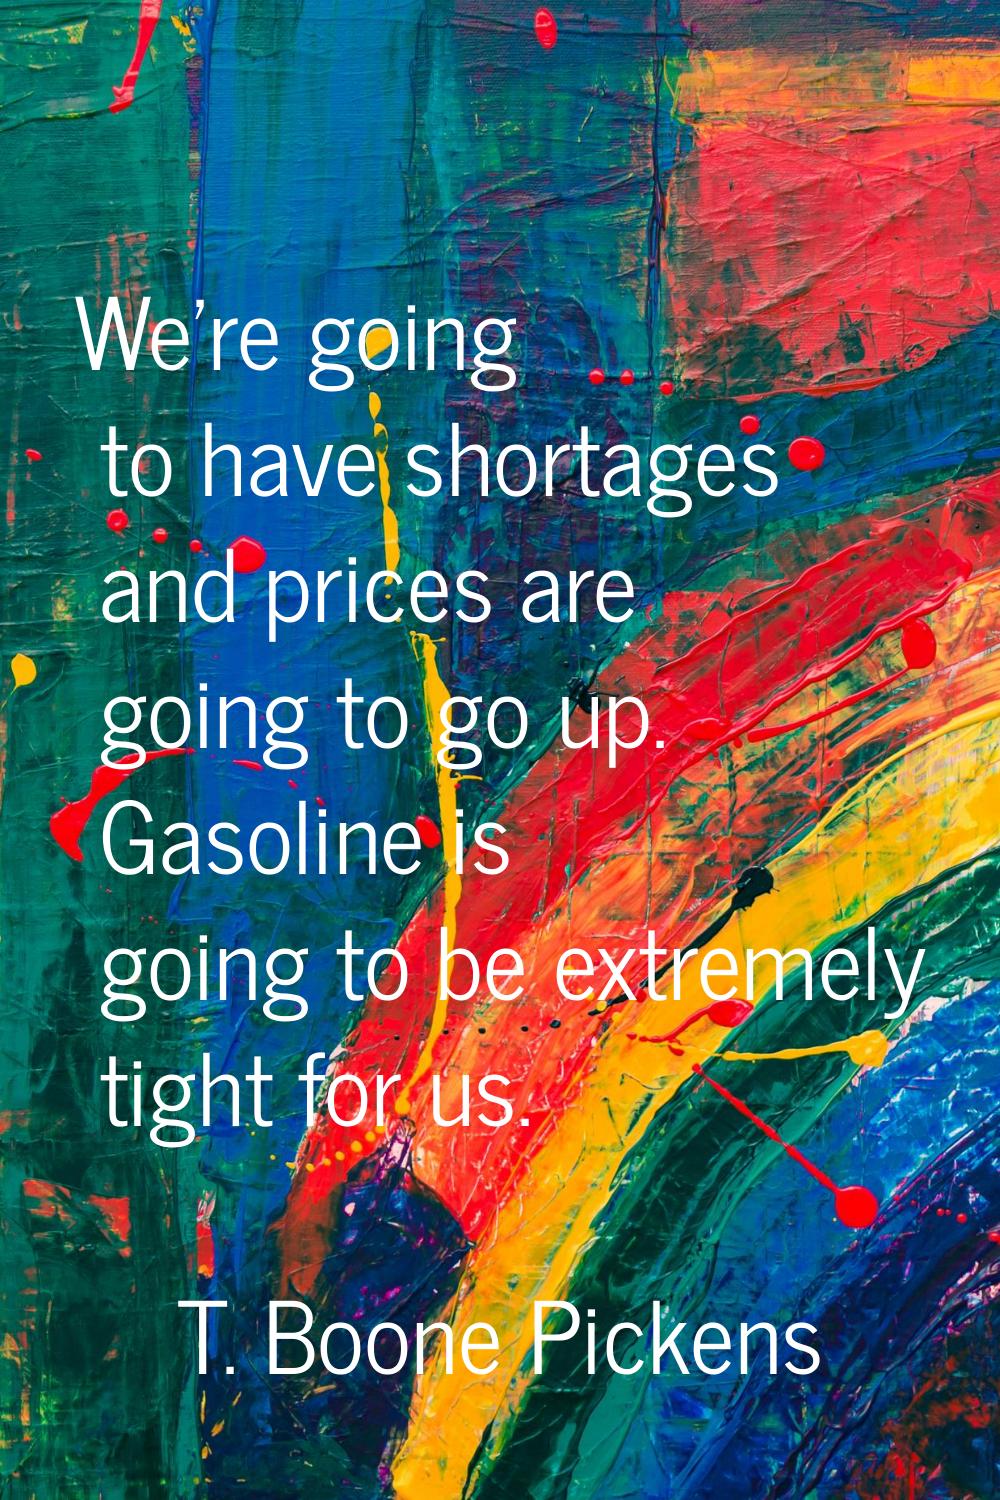 We're going to have shortages and prices are going to go up. Gasoline is going to be extremely tigh